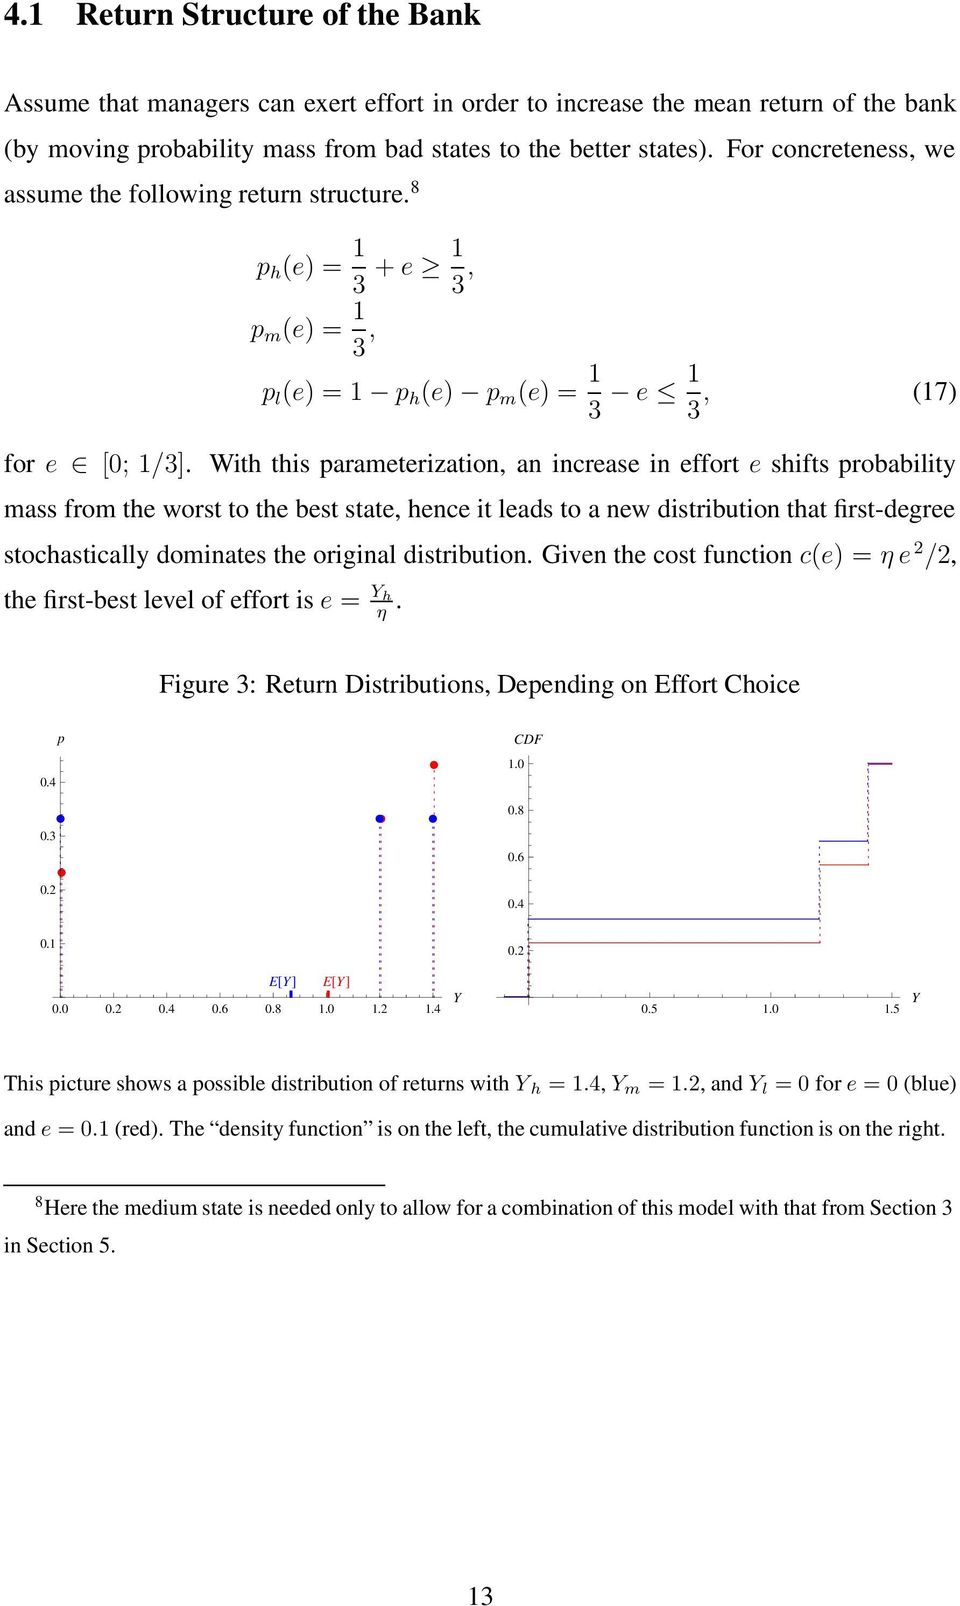 With this parameterization, an increase in effort e shifts probability mass from the worst to the best state, hence it leads to a new distribution that first-degree stochastically dominates the